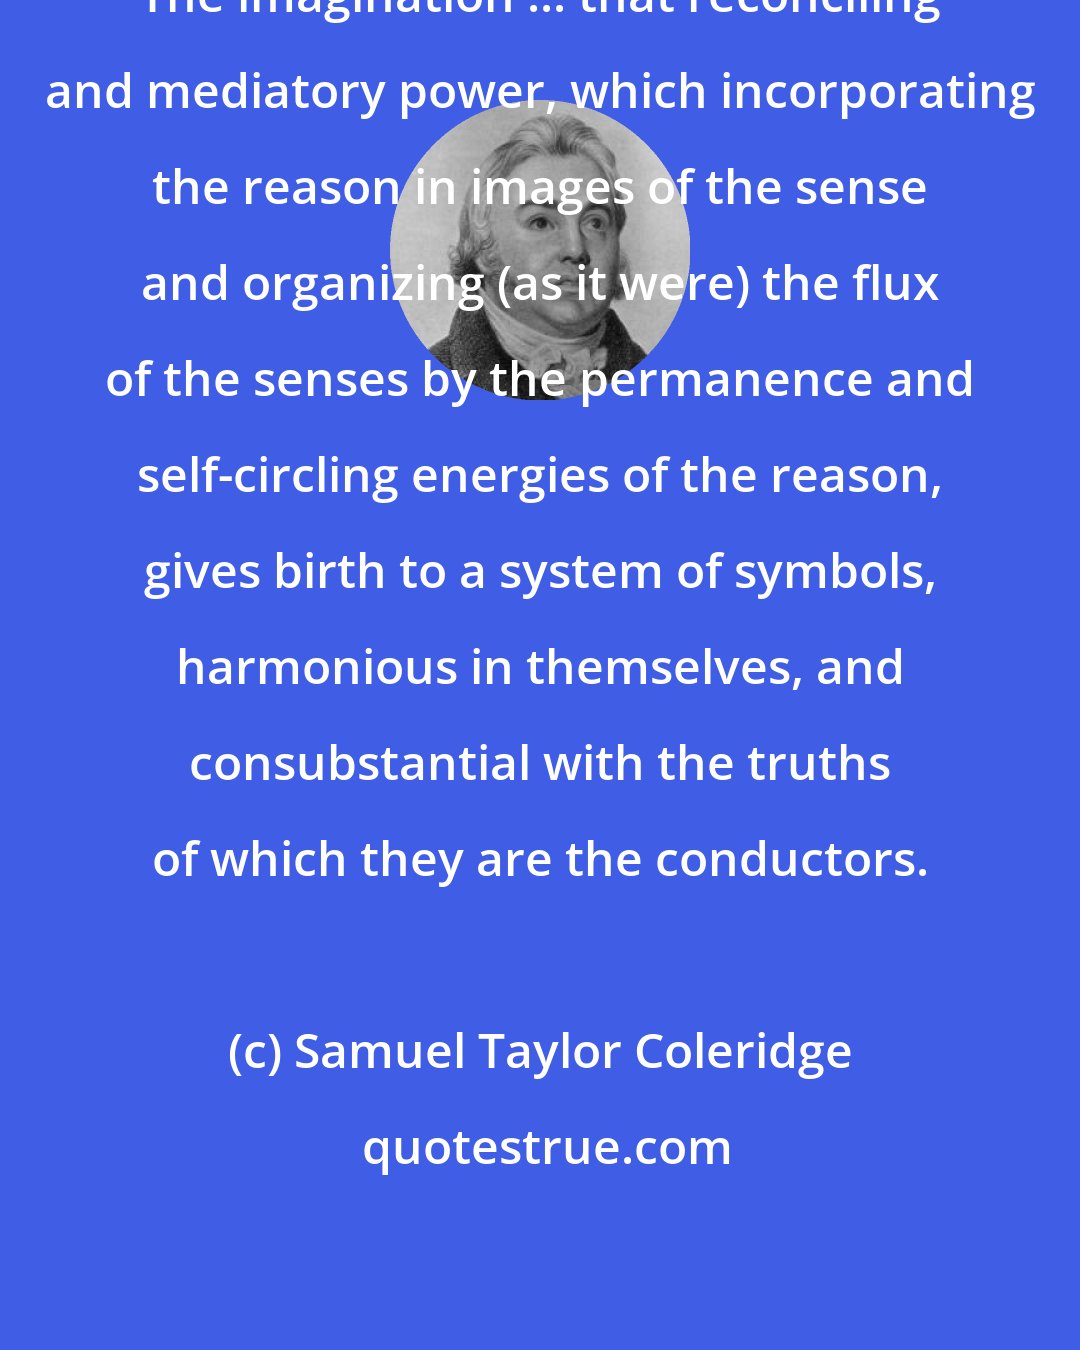 Samuel Taylor Coleridge: The imagination ... that reconciling and mediatory power, which incorporating the reason in images of the sense and organizing (as it were) the flux of the senses by the permanence and self-circling energies of the reason, gives birth to a system of symbols, harmonious in themselves, and consubstantial with the truths of which they are the conductors.